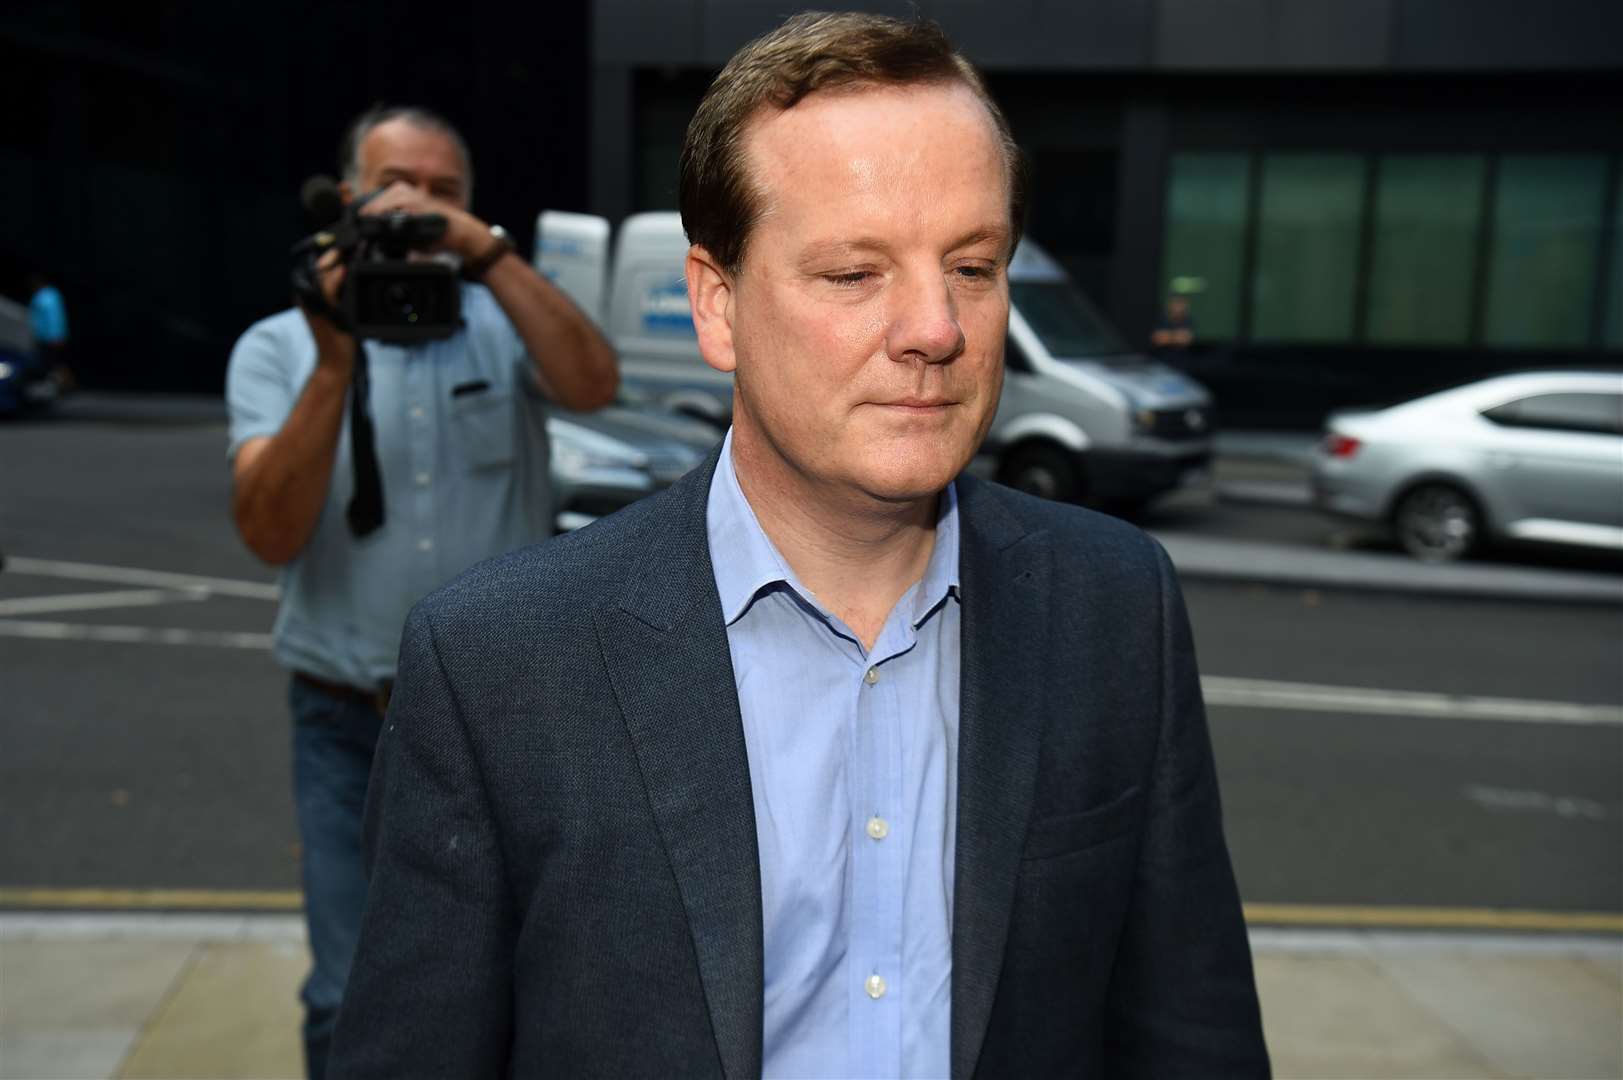 Natalie Elphicke’s former husband and predecessor as MP for Dover, Charlie Elphicke, was jailed for two years in 2020 after being convicted of sexual assault (Kirsty O’Connor/PA)